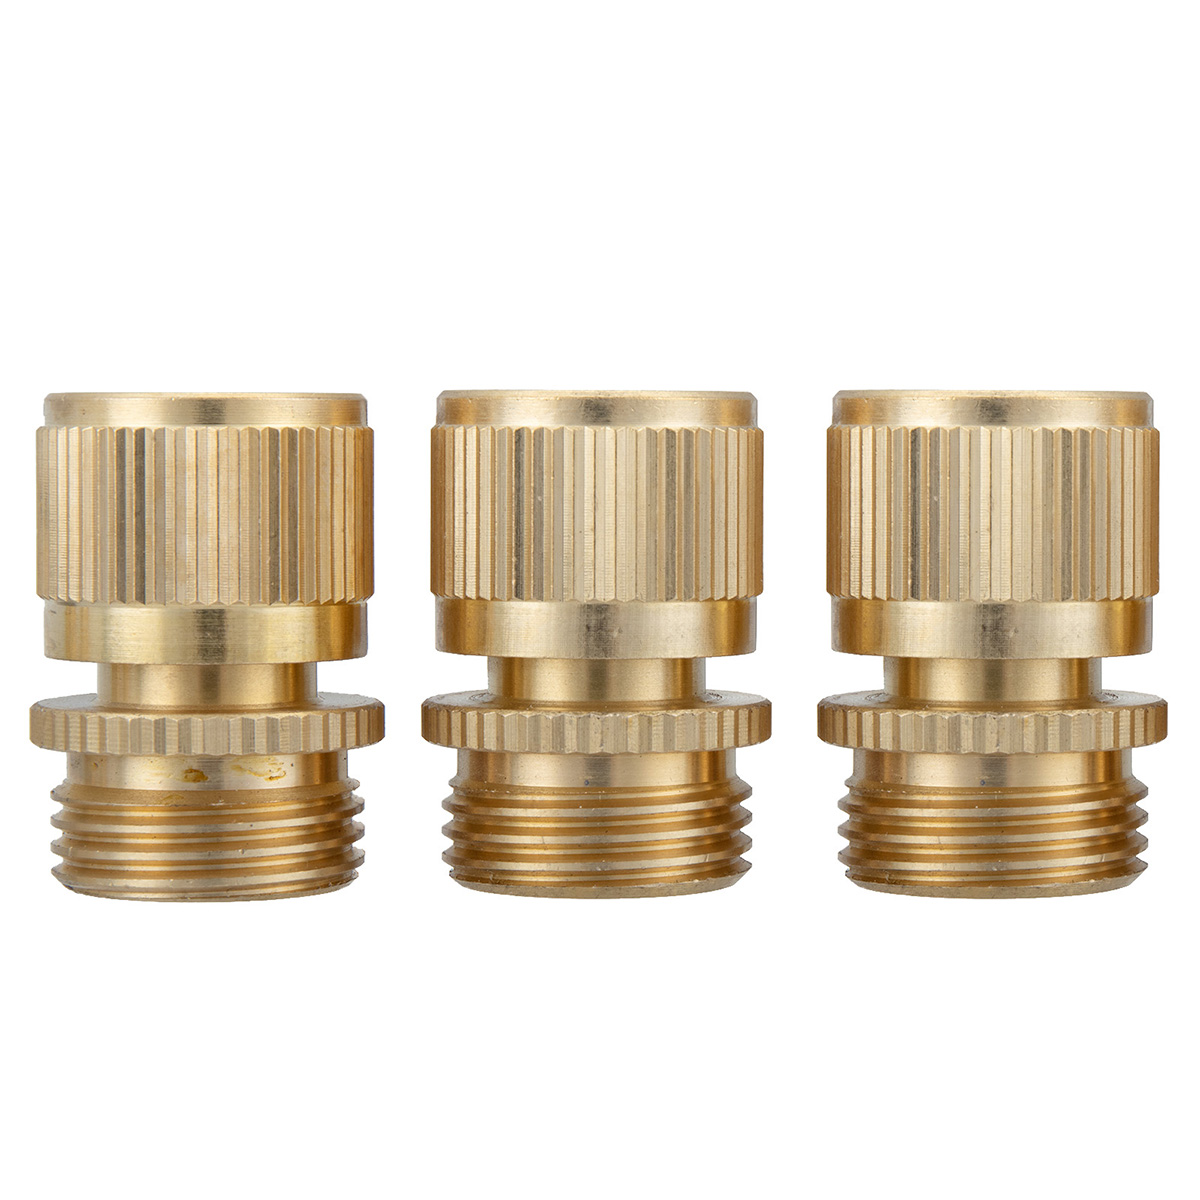 MATCC-Brass-Inner-Teeth-Quick-Connector-Set-34quot-GHT-Brass-Garden-Hose-Quick-Connector-With-Washer-1898352-12